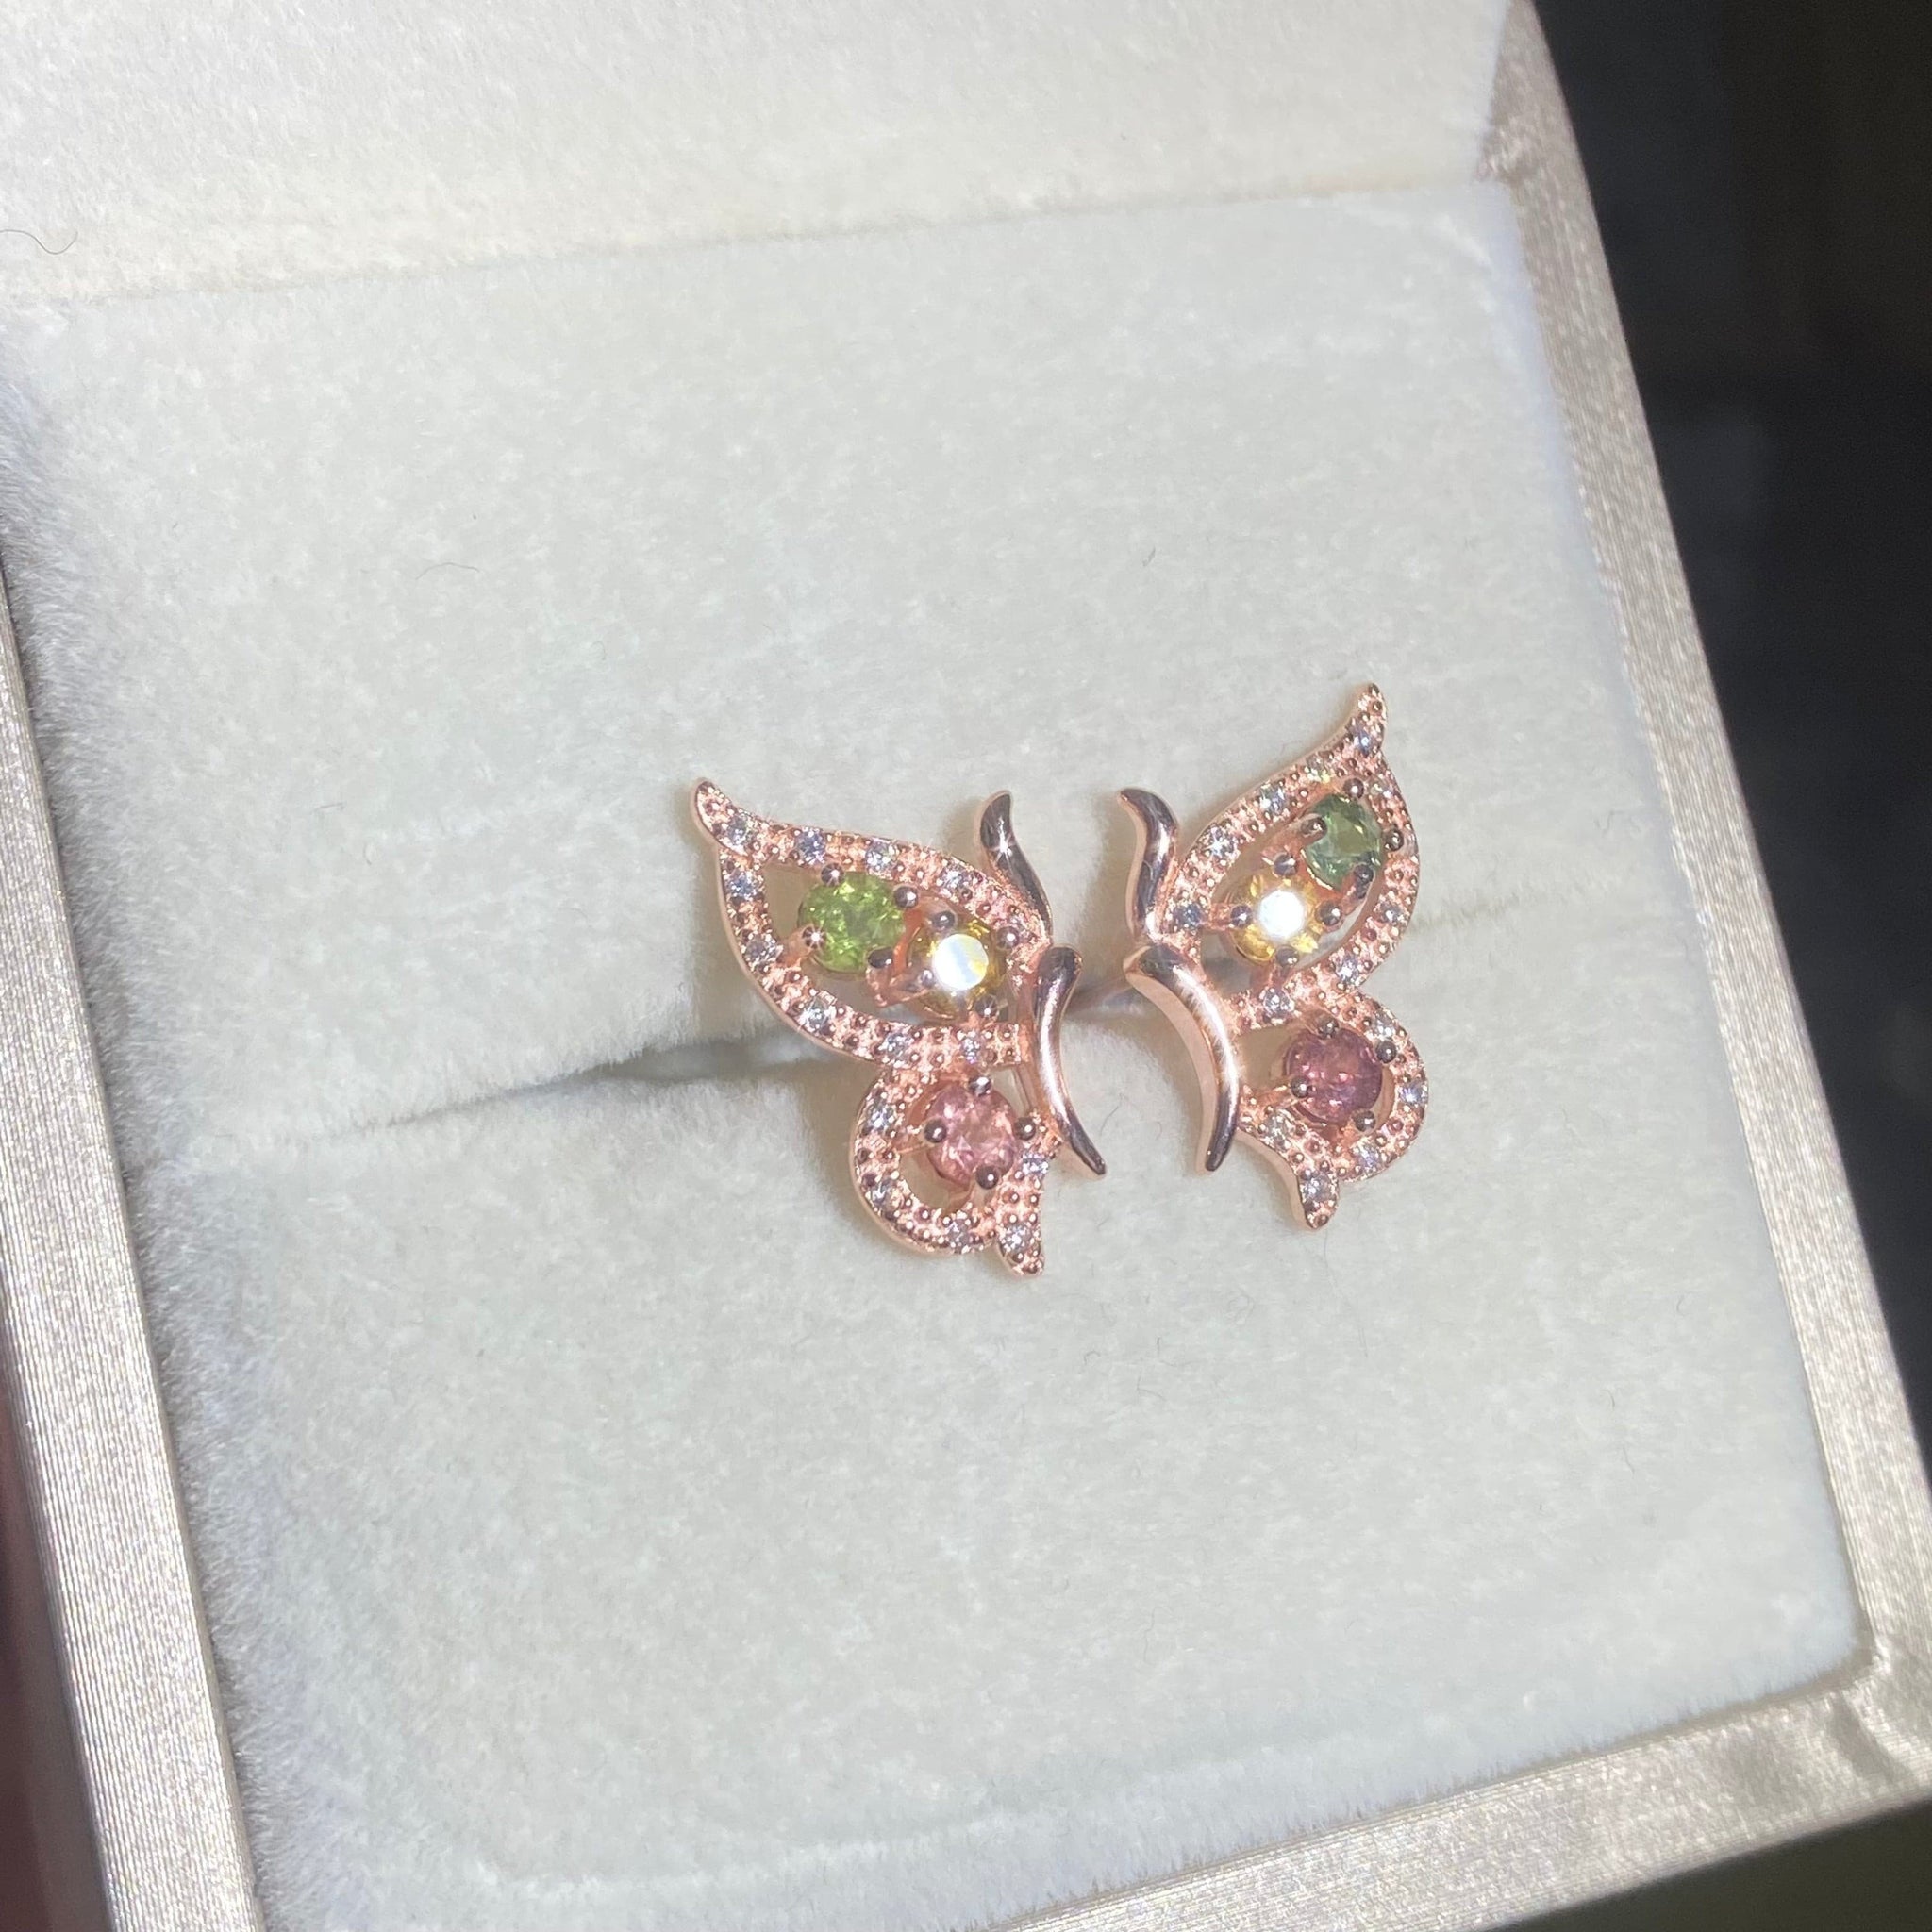 S925 Sterling Silver Natural Tourmaline Butterfly Earrings.